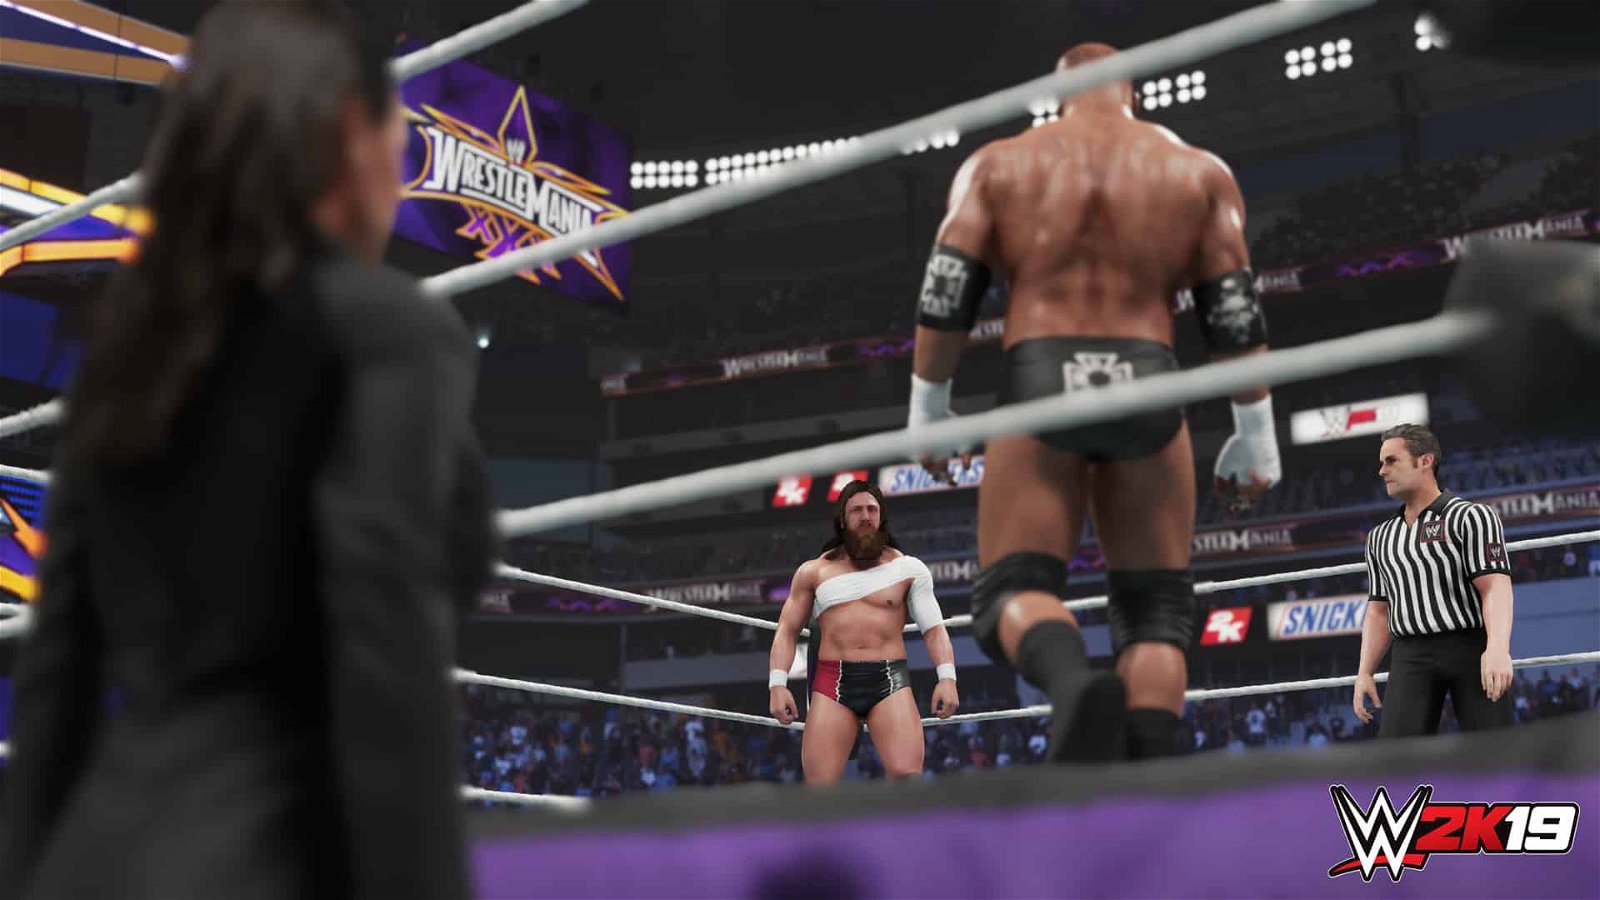 ps4 wwe w2k19 moves